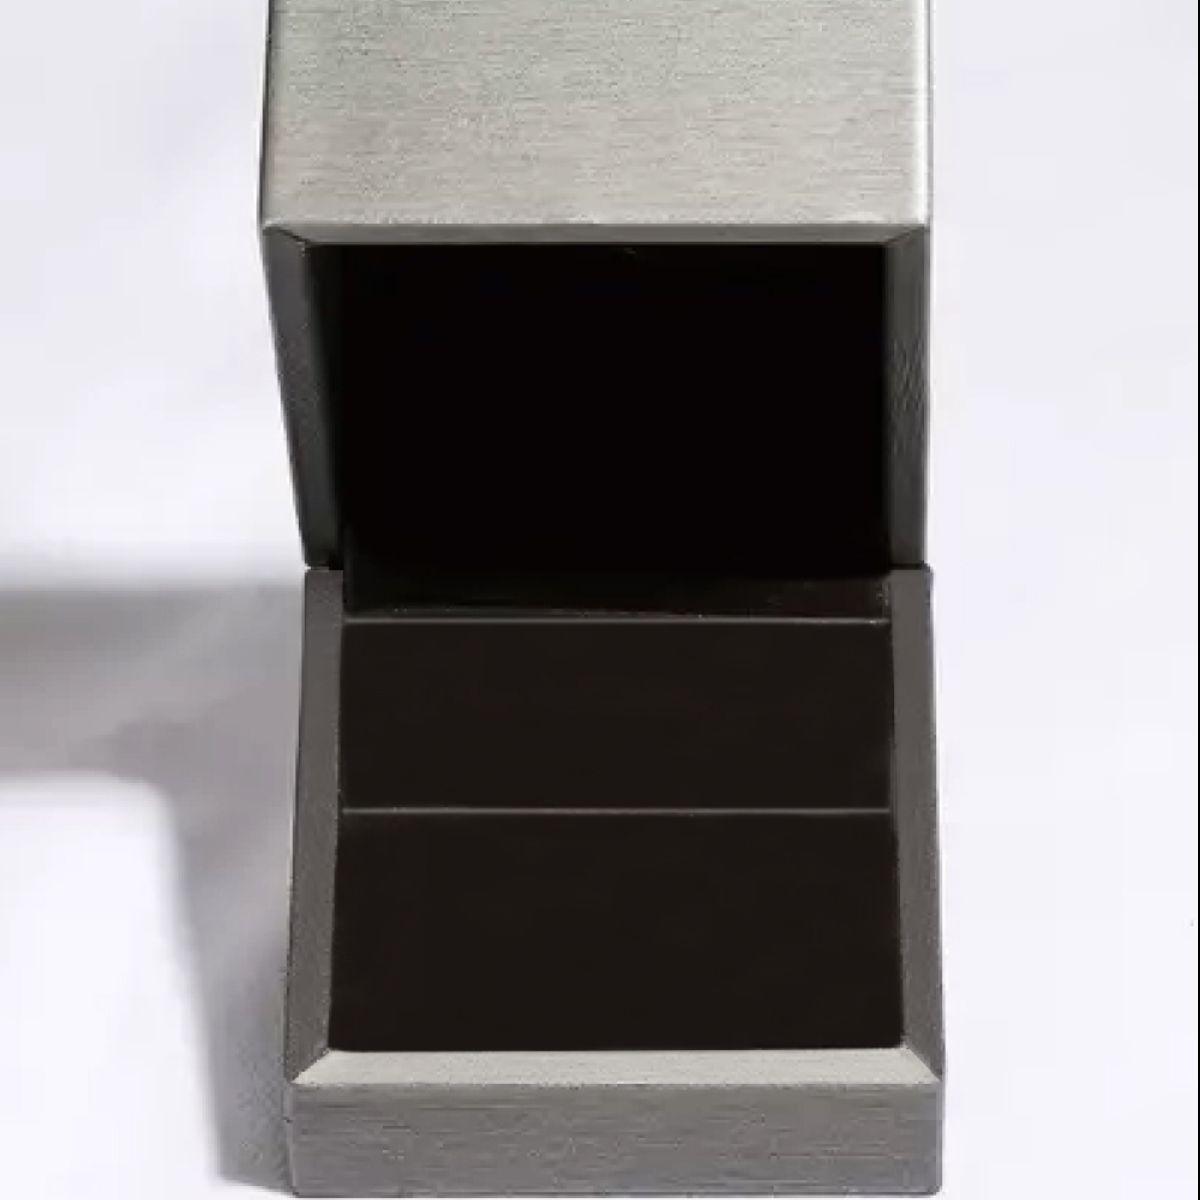 a silver ring with a black box on a white surface